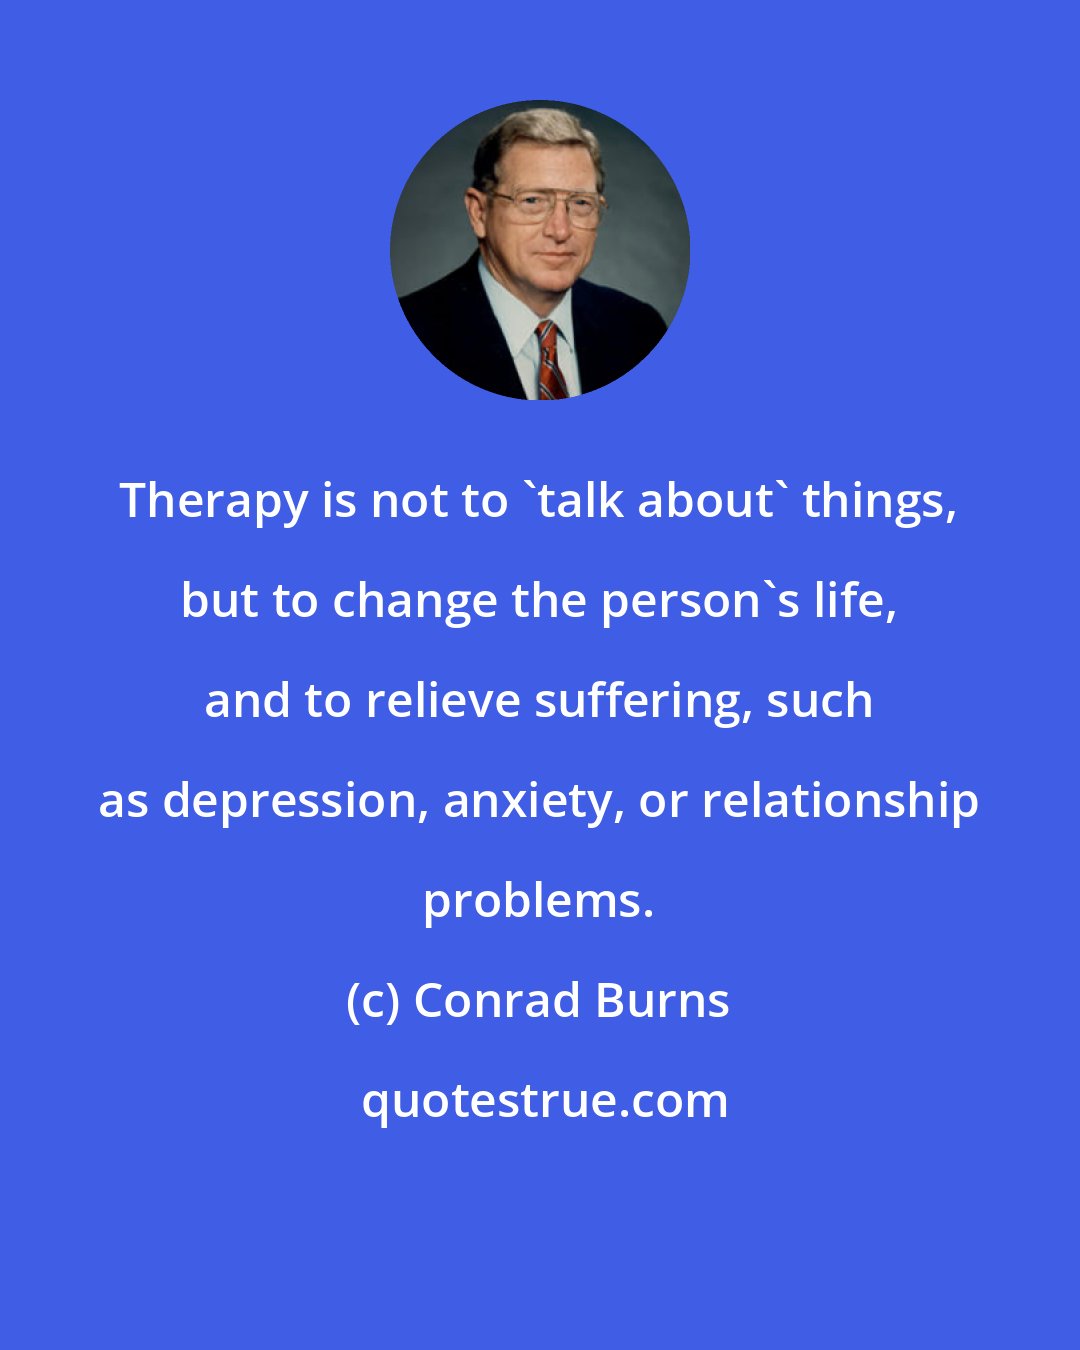 Conrad Burns: Therapy is not to 'talk about' things, but to change the person's life, and to relieve suffering, such as depression, anxiety, or relationship problems.